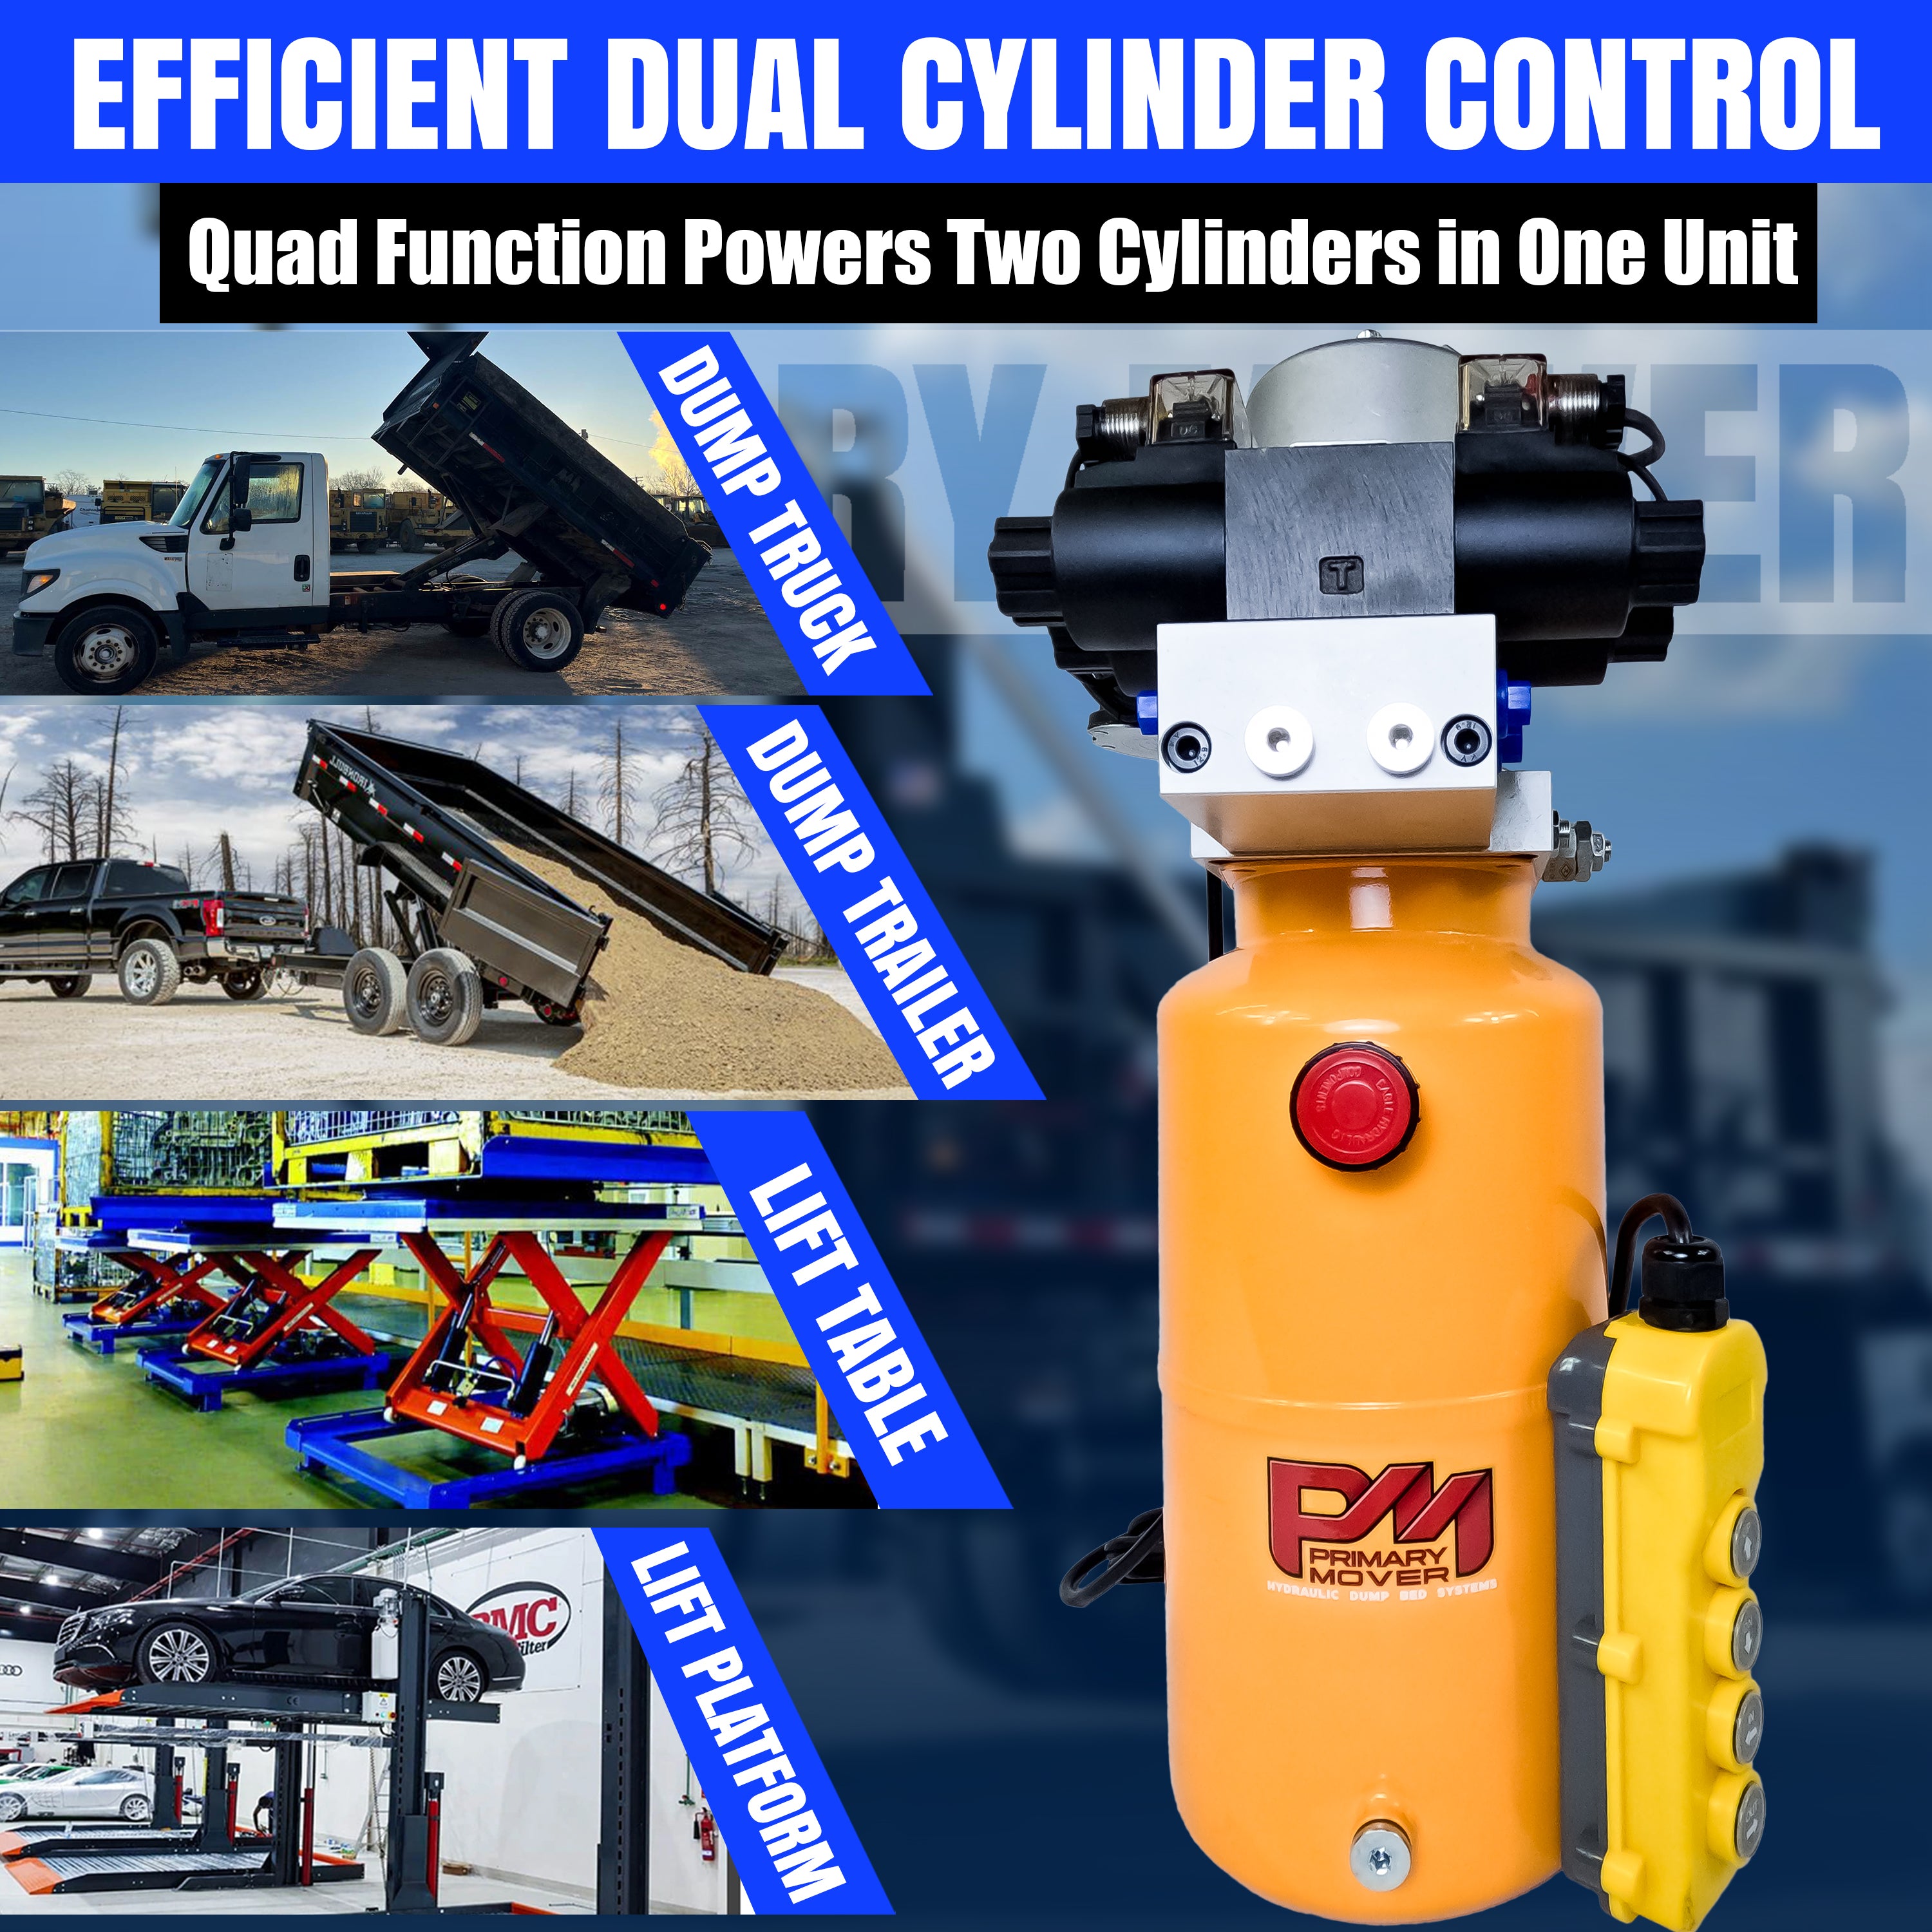 Primary Mover 12V Dual Double-Acting Hydraulic Power Unit: Compact, efficient steel unit for dump trailers and trucks, enabling four hydraulic actions simultaneously. Used for any truck or trailer application. 1/2 ton truck dump bed kit.